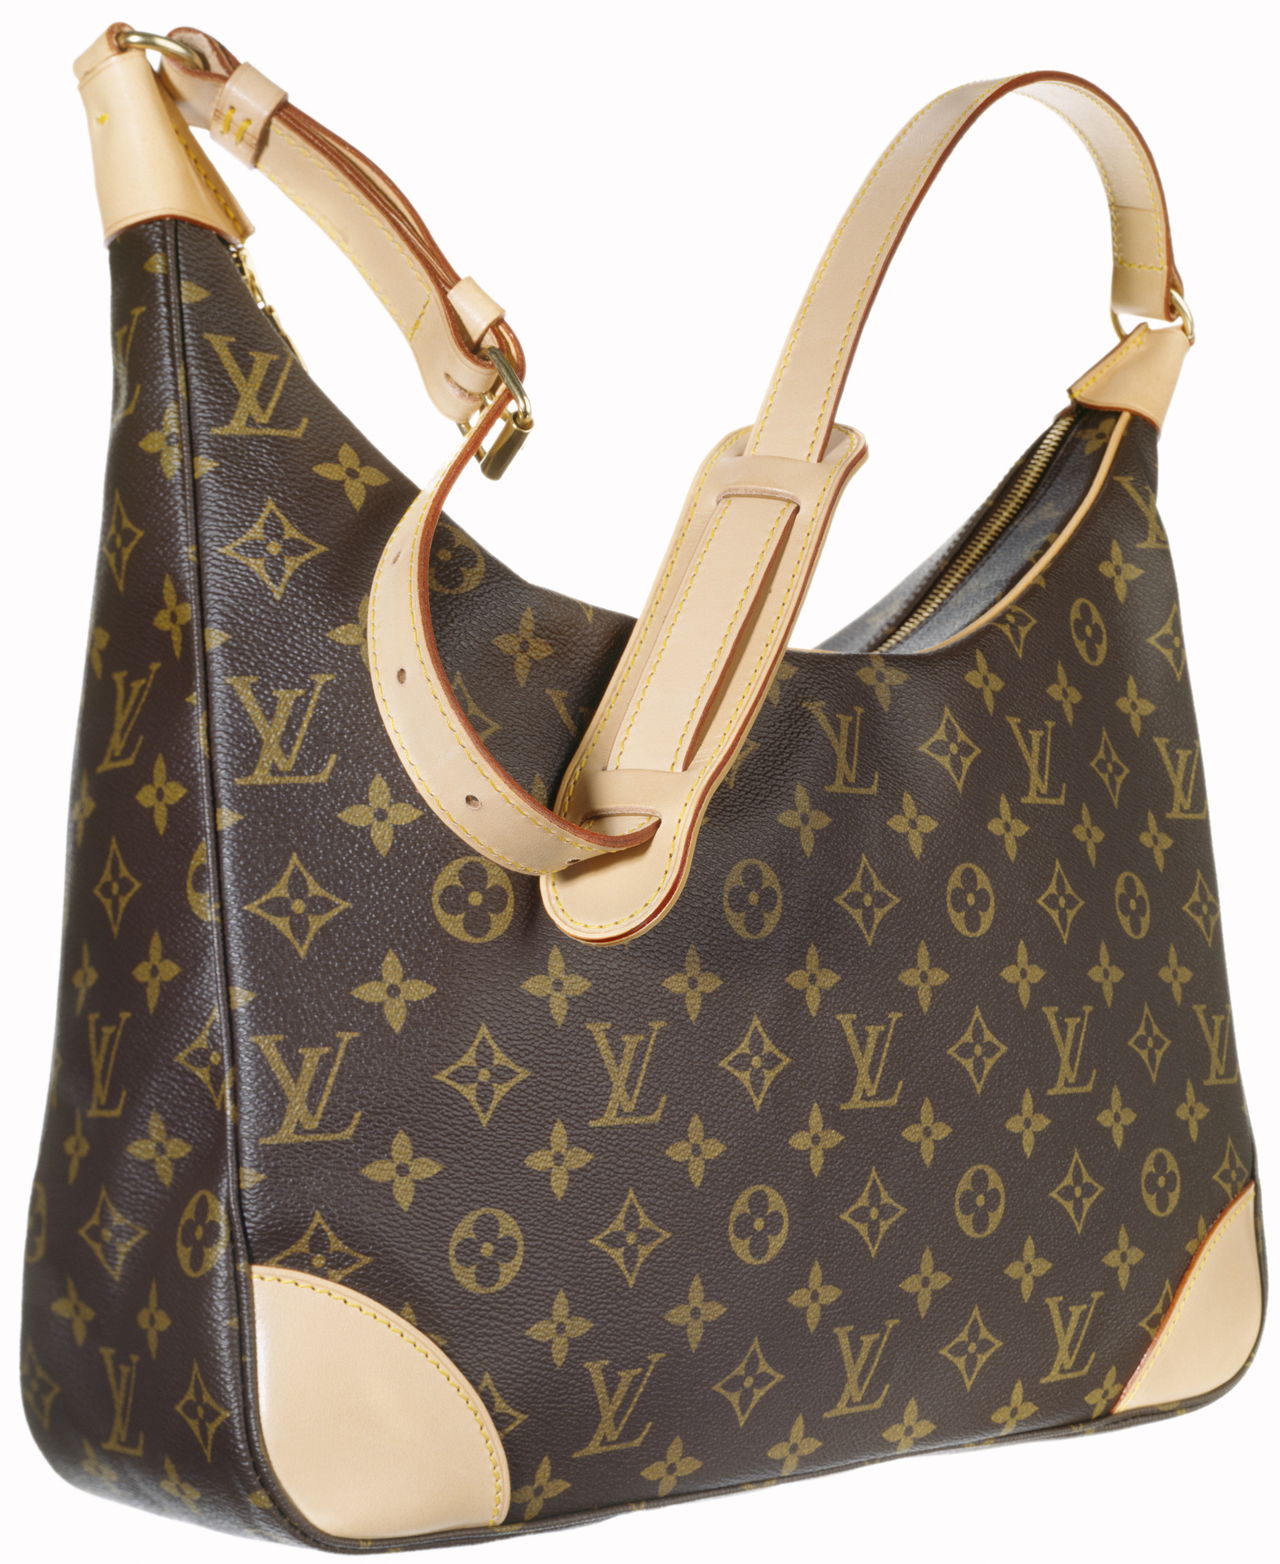 How To Spot Fake Louis Vuitton Bag Charms » STRONGER